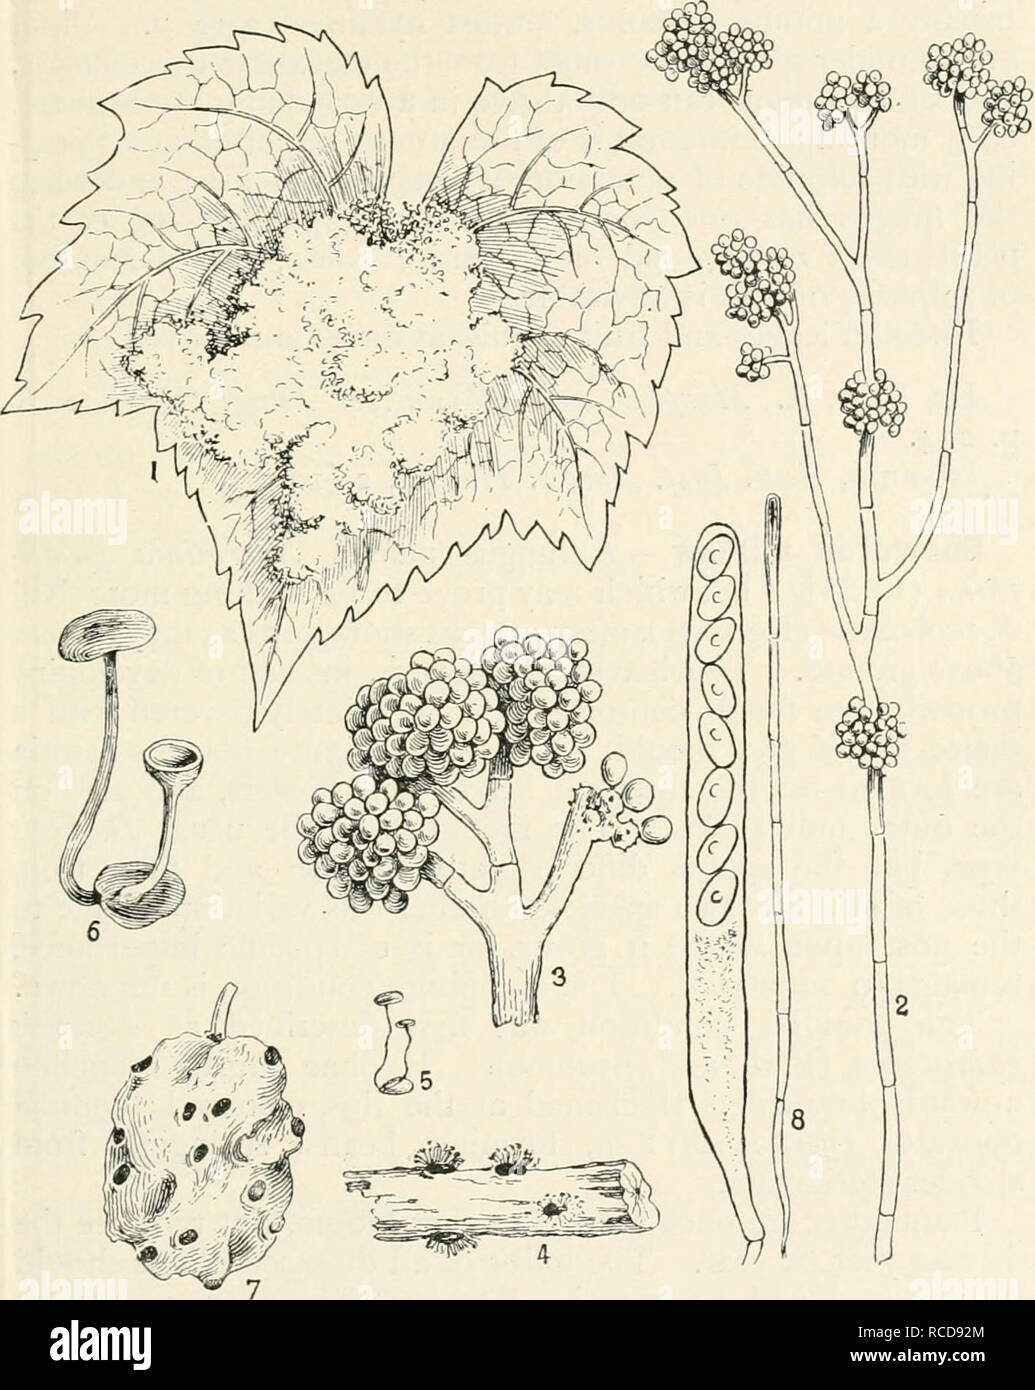 . Diseases of cultivated plants and trees. Plant diseases; Plants -- Wounds and injuries; Plants, Protection of; Trees -- Diseases and pests. SCLEROTINIA 261 vine directly. Istvanffi has written a very detailed account, profusely illustrated, of the vine sclerotinia.. Fig. ^-j.—Sclerotinia fuckeliana. i, vine leaf with Botrytis form of fungus ; 2, conidiophores of Botrytis ; 3, a head or cluster of conidia ; 4, sclerotia bearing Botrytis form of fruit ; 5, asclerotium bearing two ascophores ; 6, like fig. 5, on a larger scale ; 7, a shrivelled grape with sclerotia ; 8, ascus with spores. All e Stock Photo